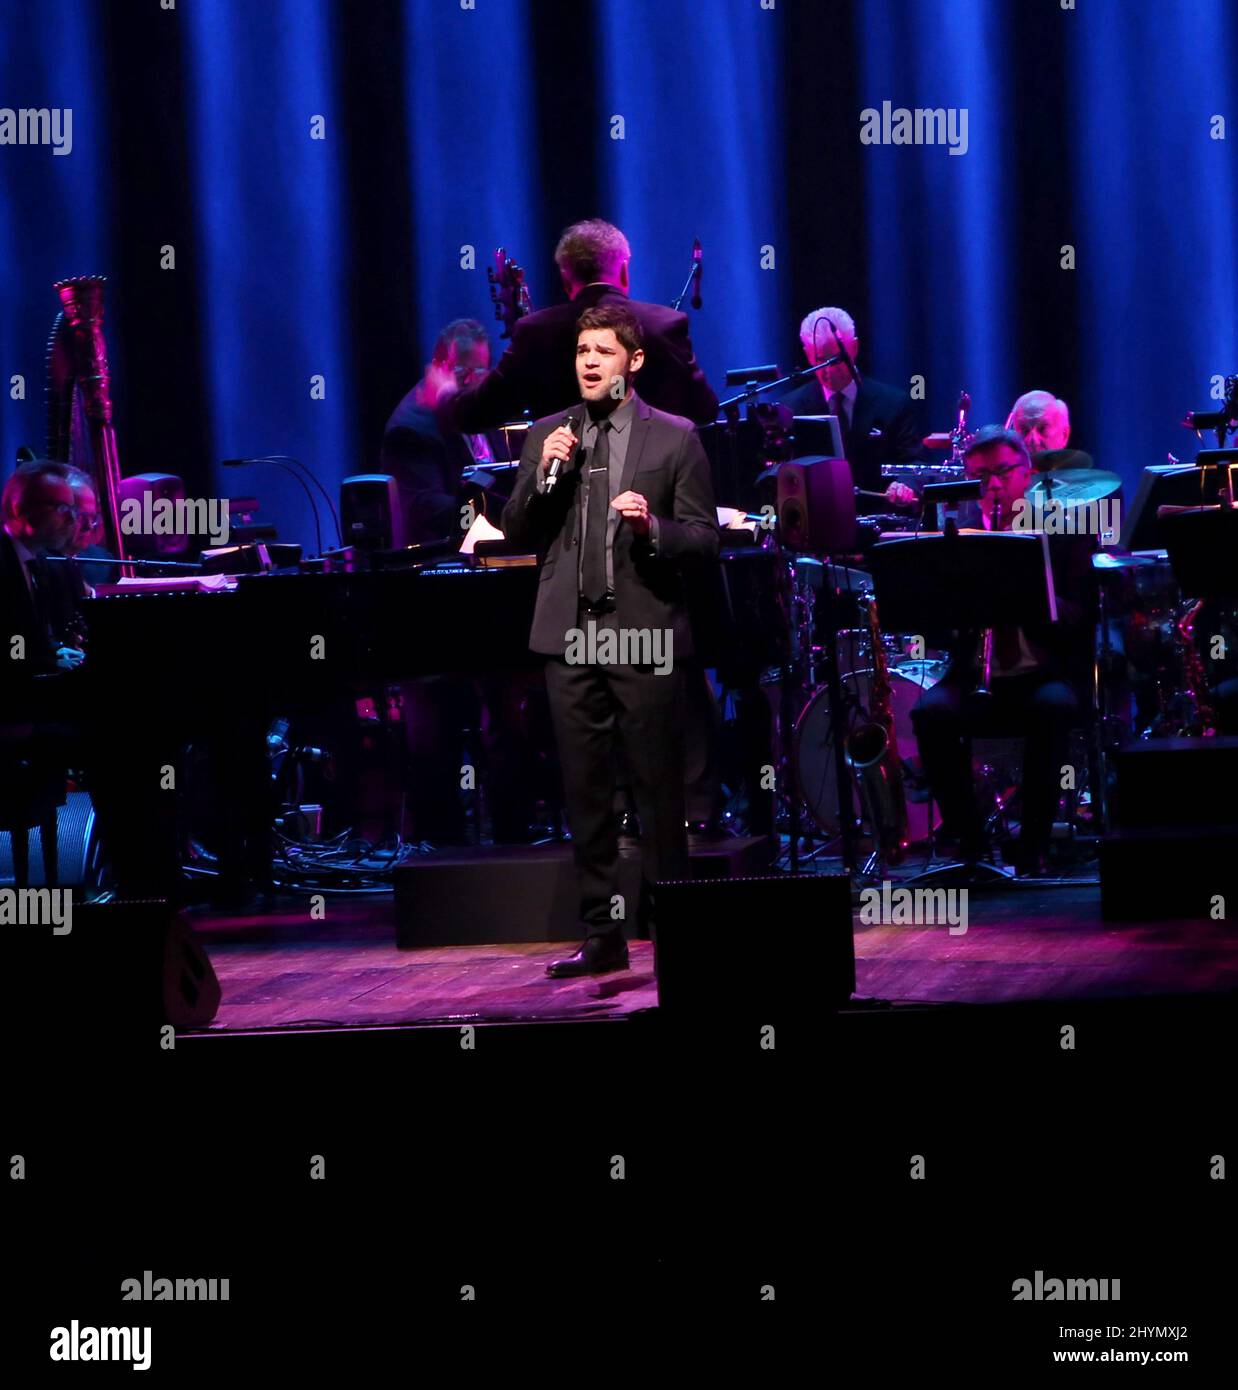 Jeremy Jordan performing at Jerry Herman: A Celebration held at the Lunt Fontanne Theatre on February 3, 2020 in New York City, NY Stock Photo